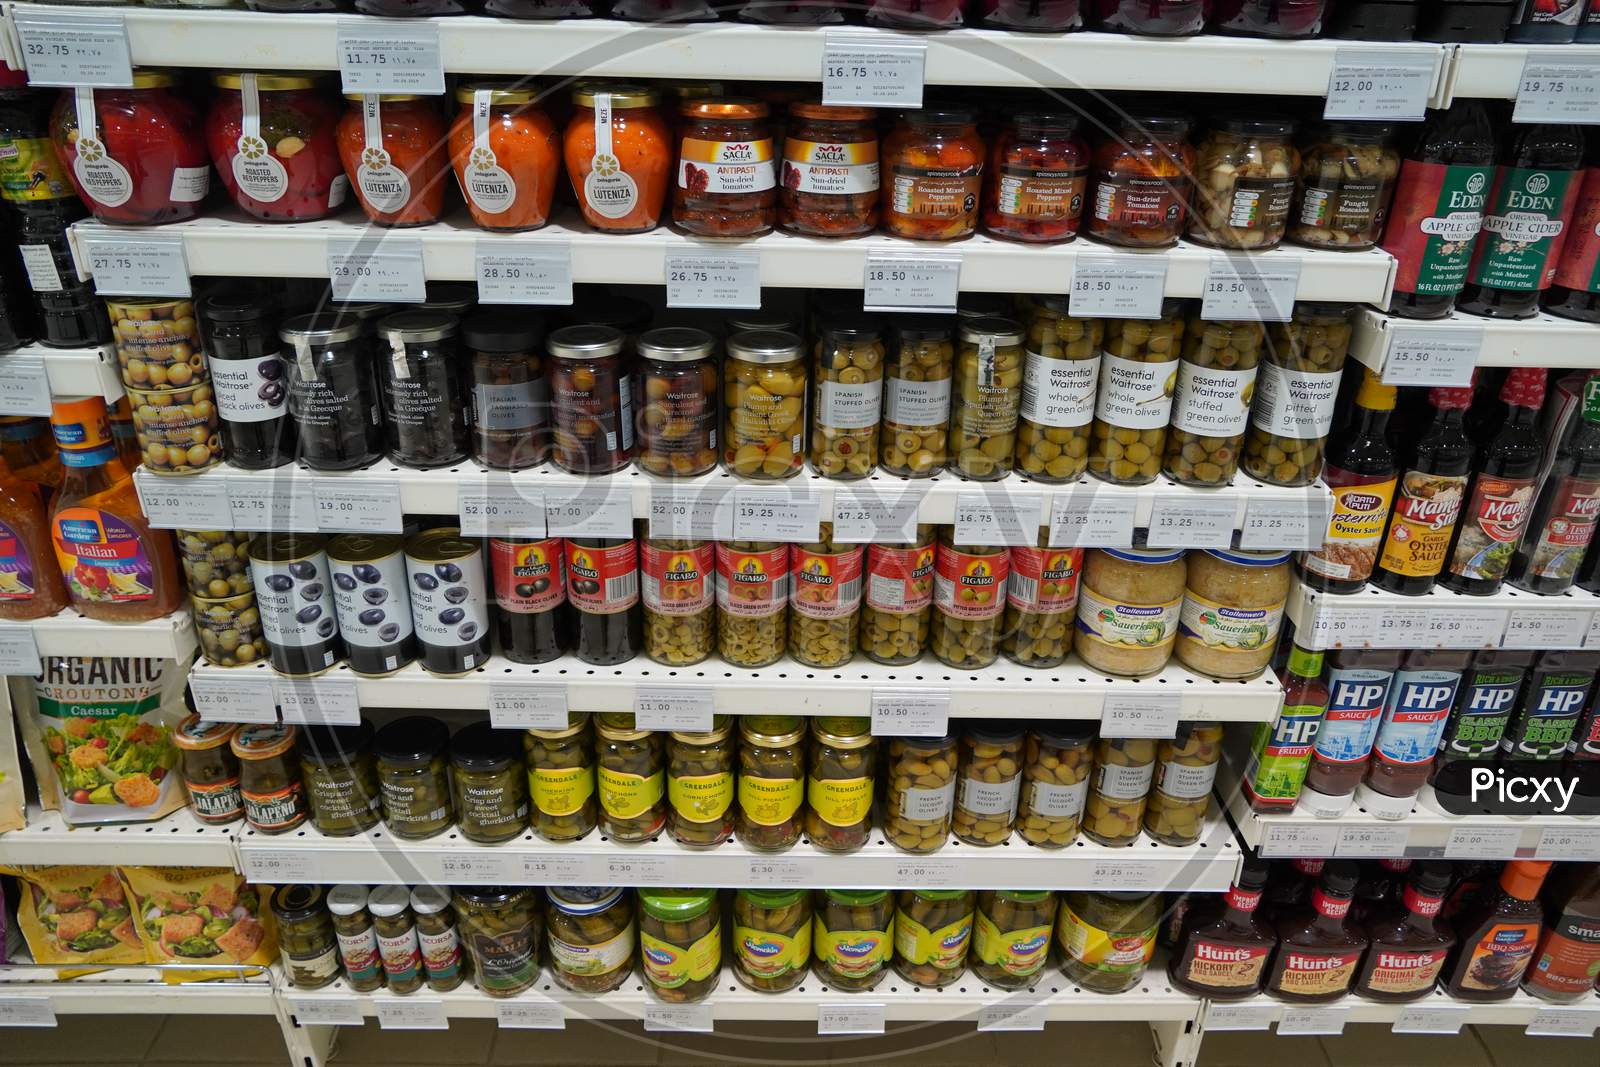 Traditional Turkish Pickles Of Various Fruits And Vegetables. Jars Of Salted Pickles On A Store Shelf. Beetroot, Olives, Cabbage, Cucumber, Onion, Tomato.